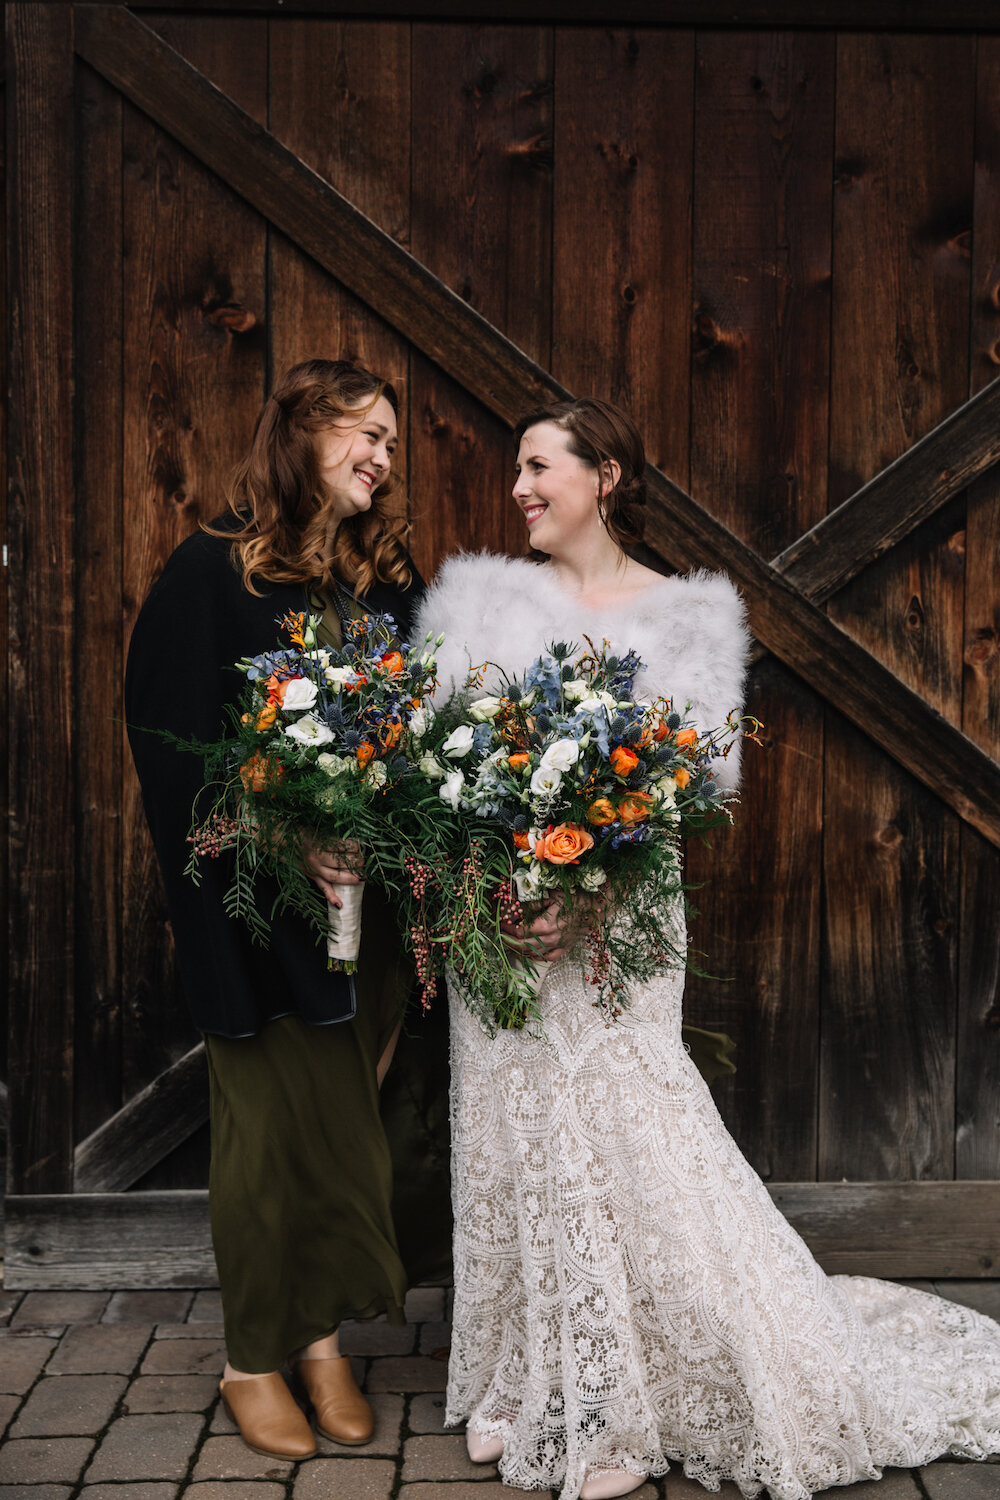 Bride and Maid of Honor standing in front of a rustic barn door at The Inn at Barley Sheaf Farm located in Holicong, PA